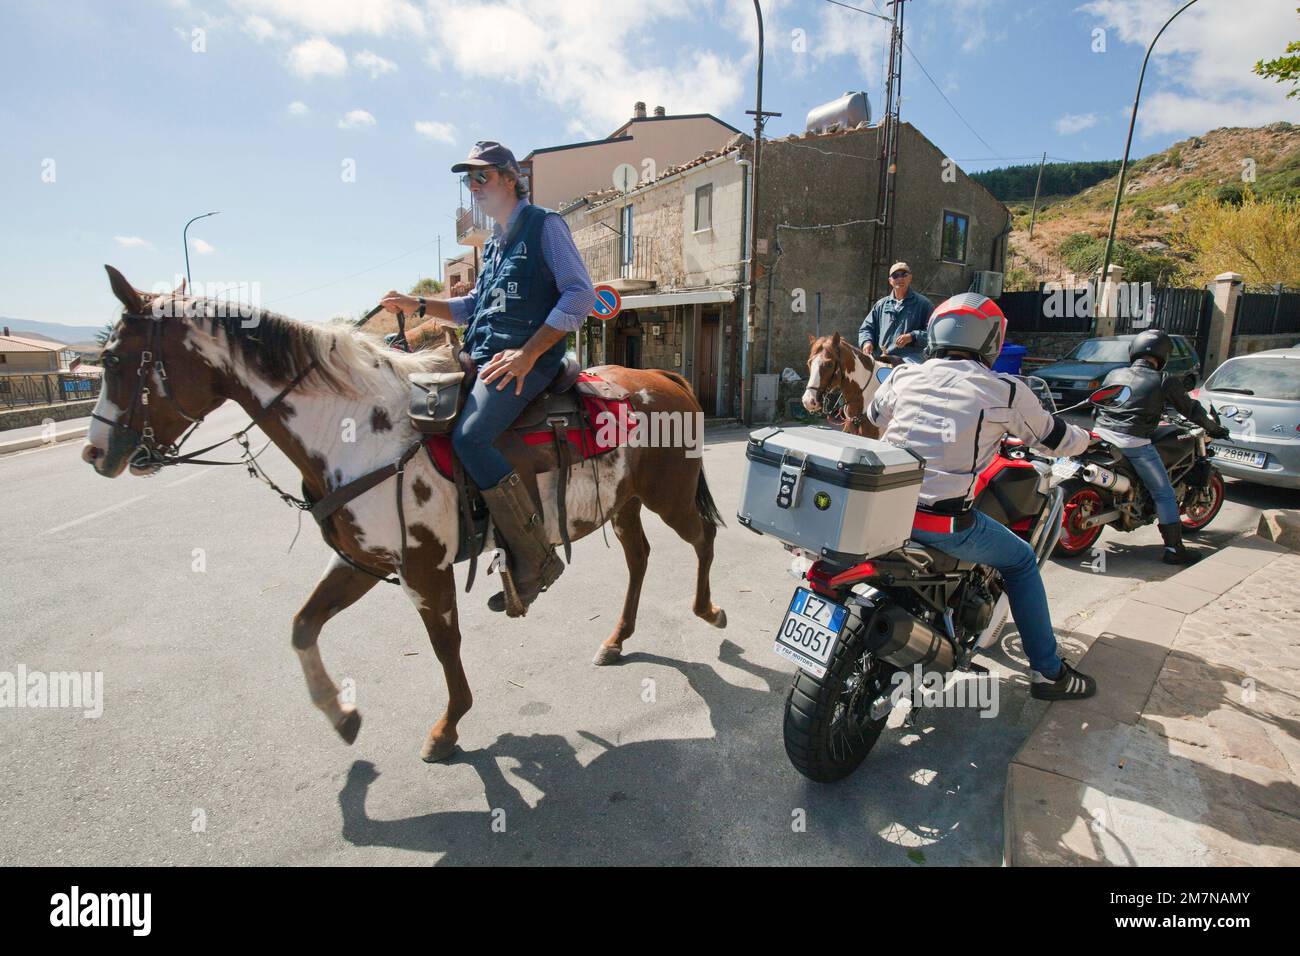 Meeting of riders and bikers in the mountain village of Castelbuono, Sicily Stock Photo